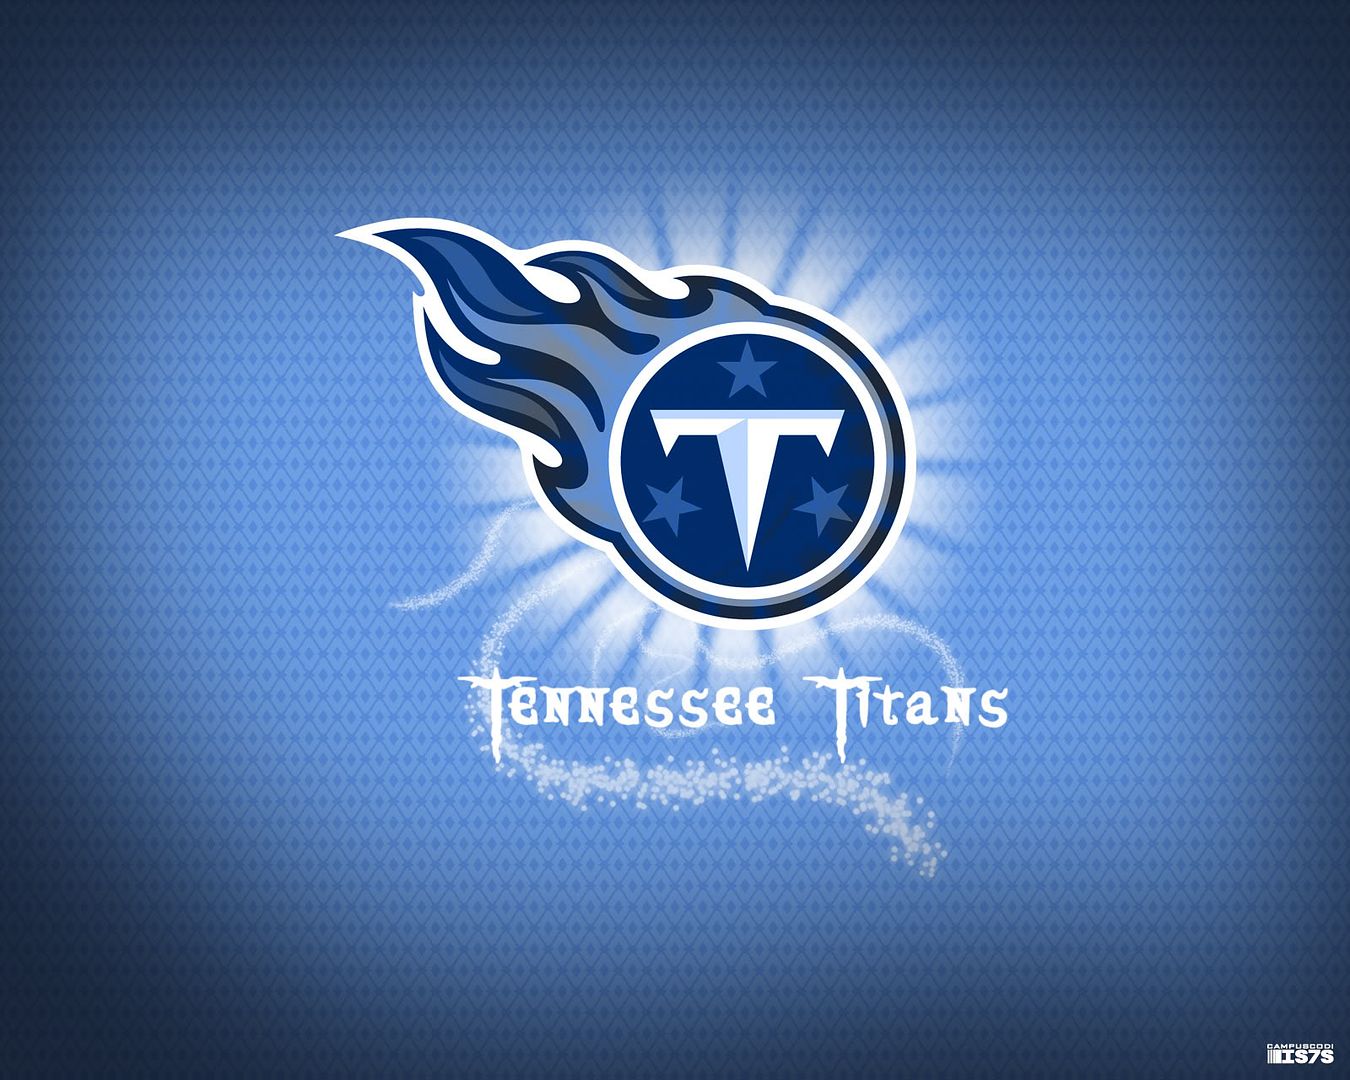 Titans Tennessee